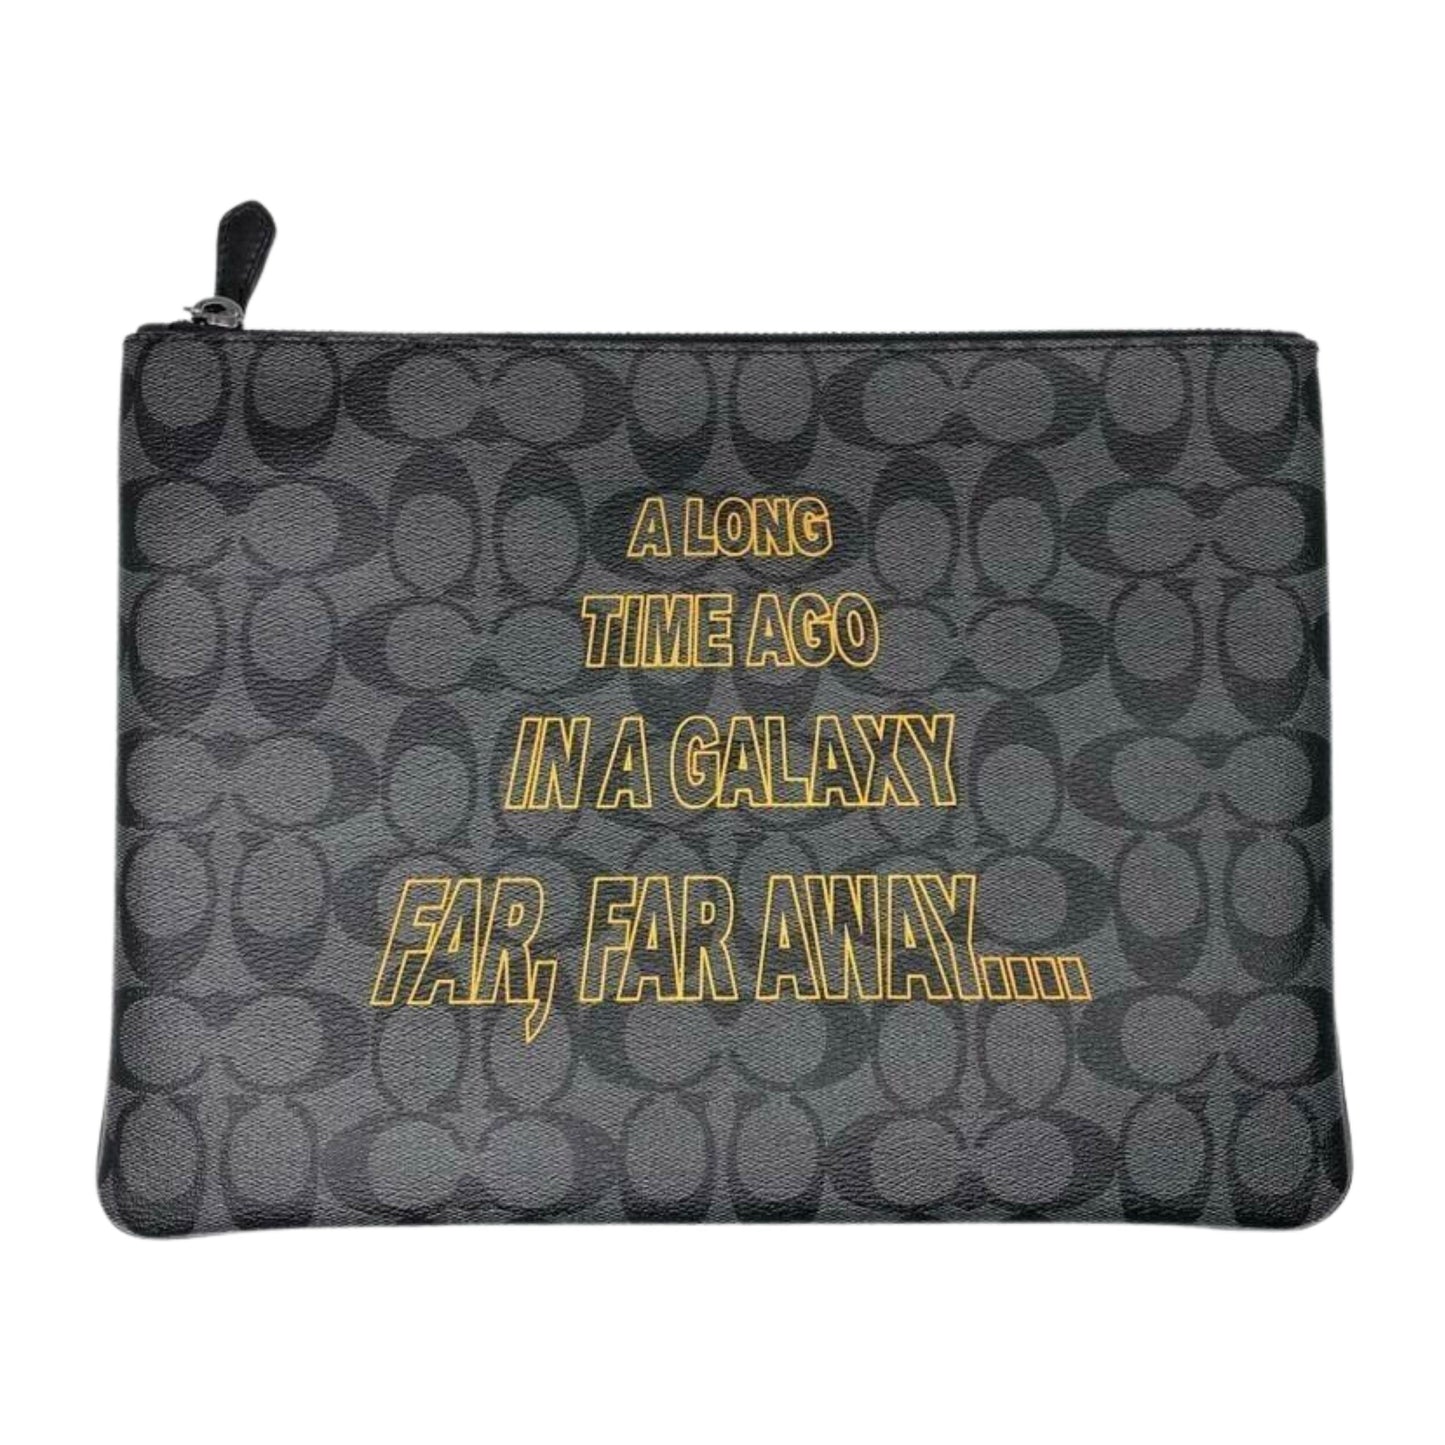 Coach x Star Wars Large Pouch Black Charcoal Signature Bag -F88119 - 193971486710